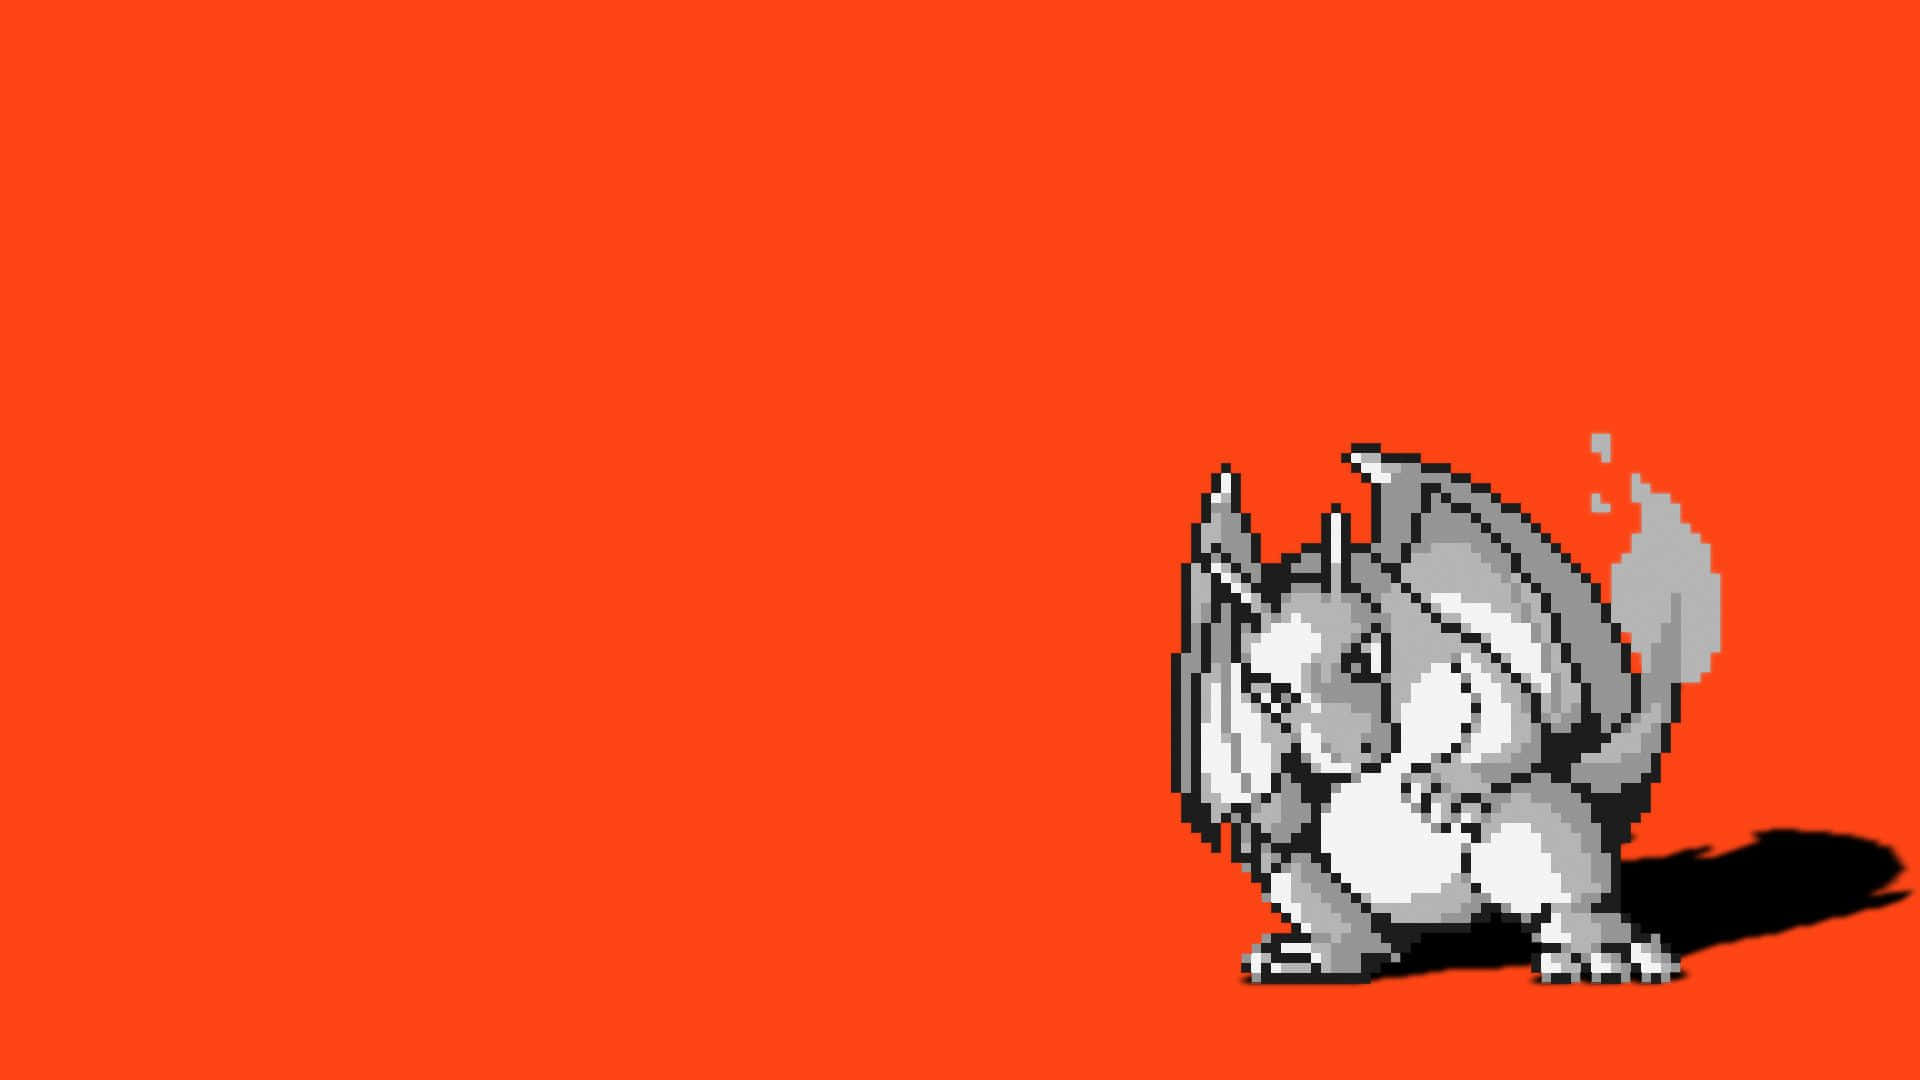 A White And Black Pixelated Dragon On An Orange Background Wallpaper